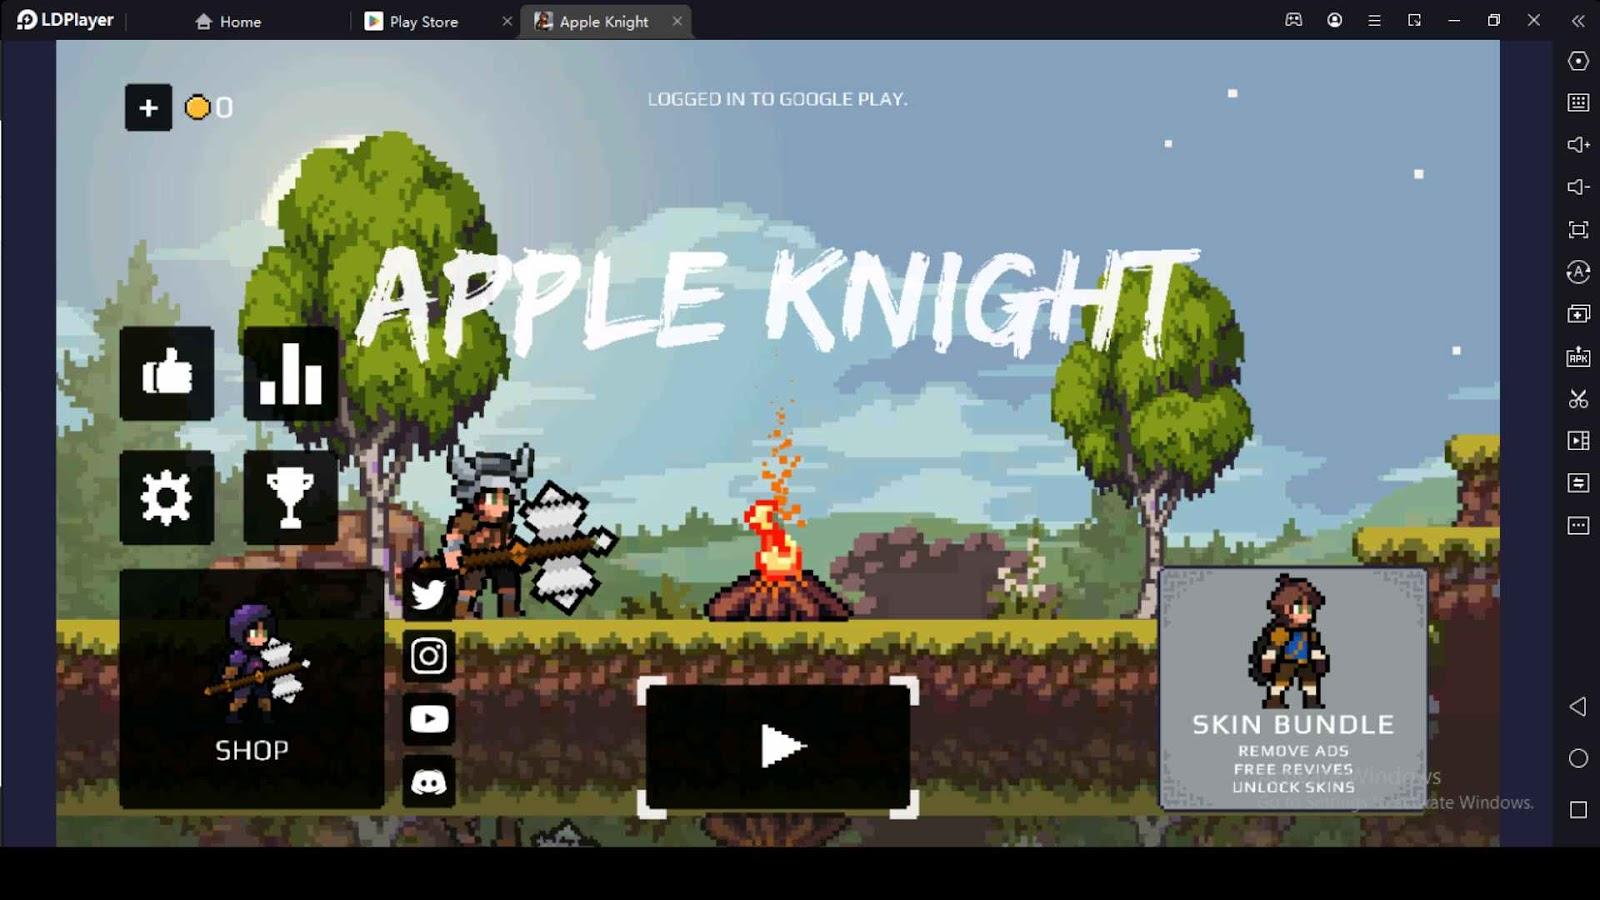 Apple Knight Action Platformer Beginner Guide with Tips for the